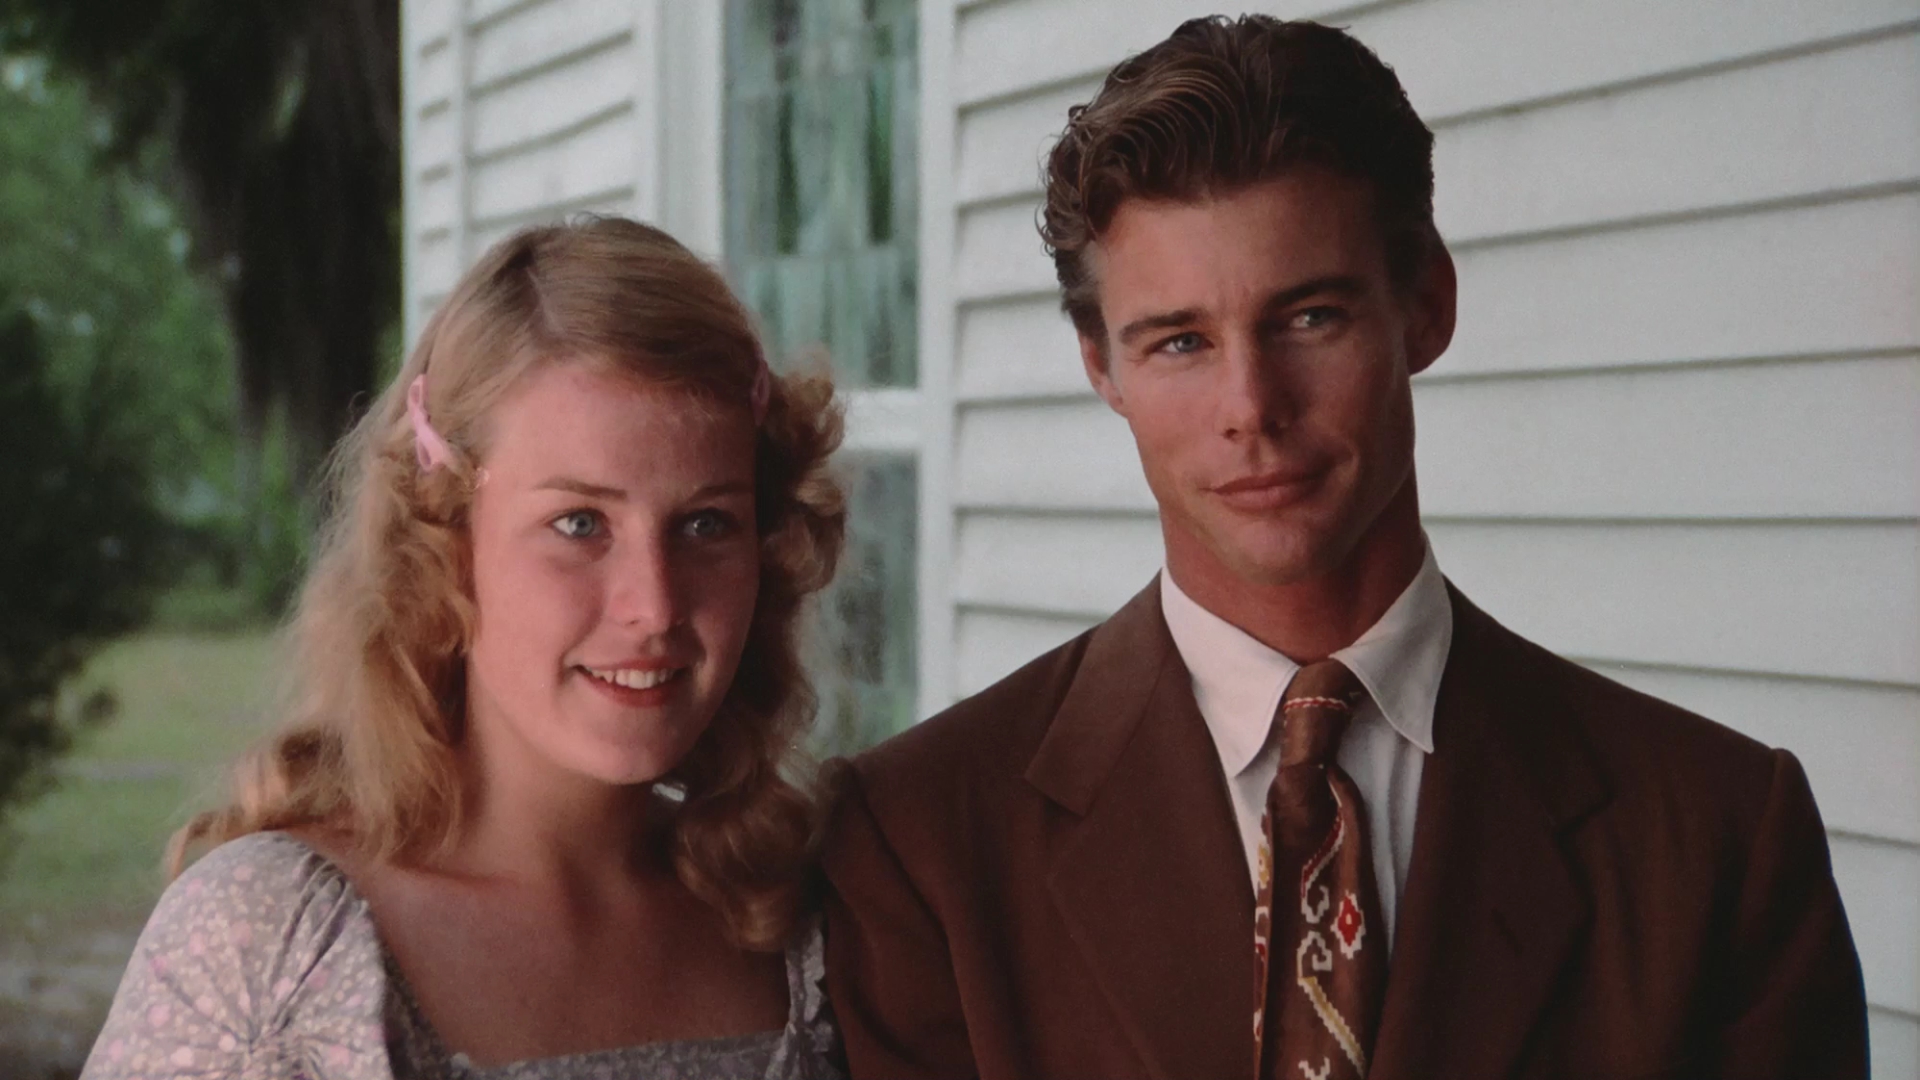 MOVIE PHOTO: Buster and Billie-Jan-Michael Vincent and Pamela Sue